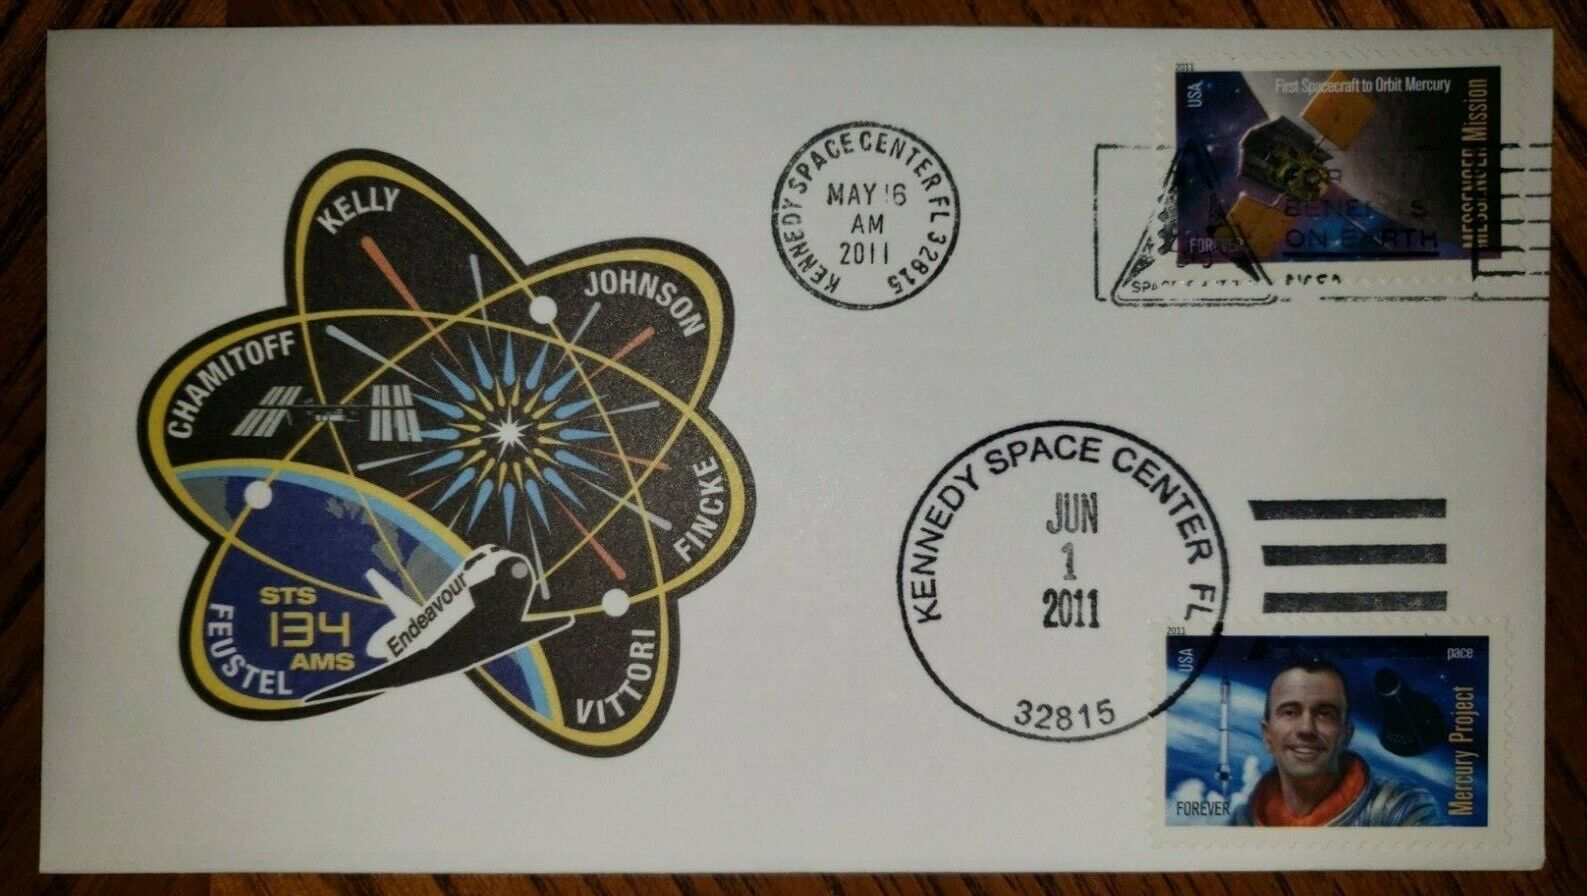 Space Shuttle Endeavor Sts-134 Launch And Landing Cached Cover Us# 4528-7